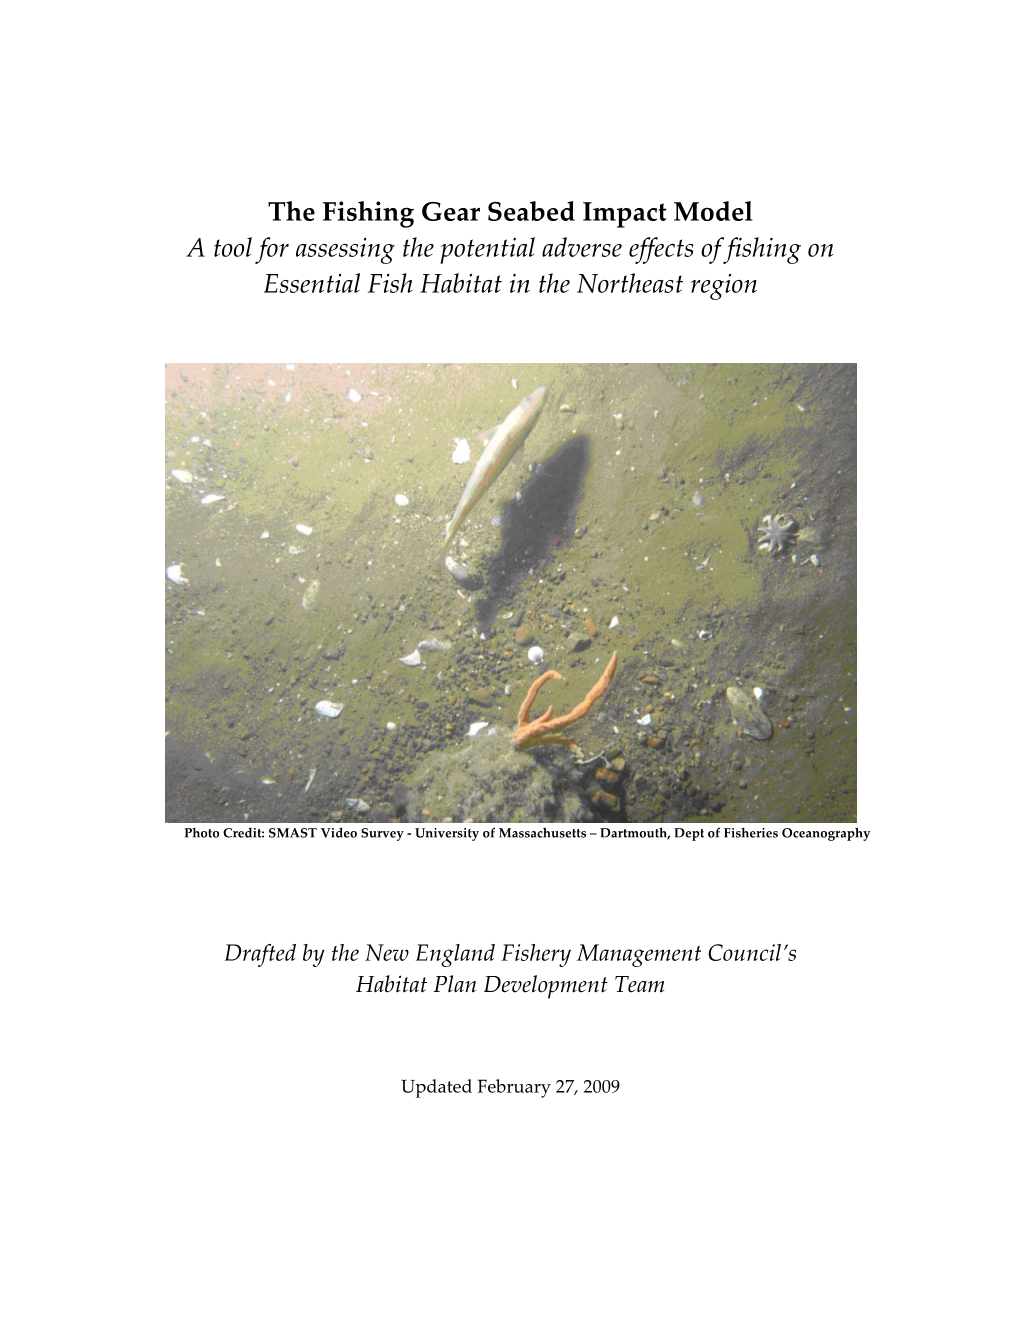 The Fishing Gear Seabed Impact Model a Tool for Assessing the Potential Adverse Effects of Fishing on Essential Fish Habitat in the Northeast Region